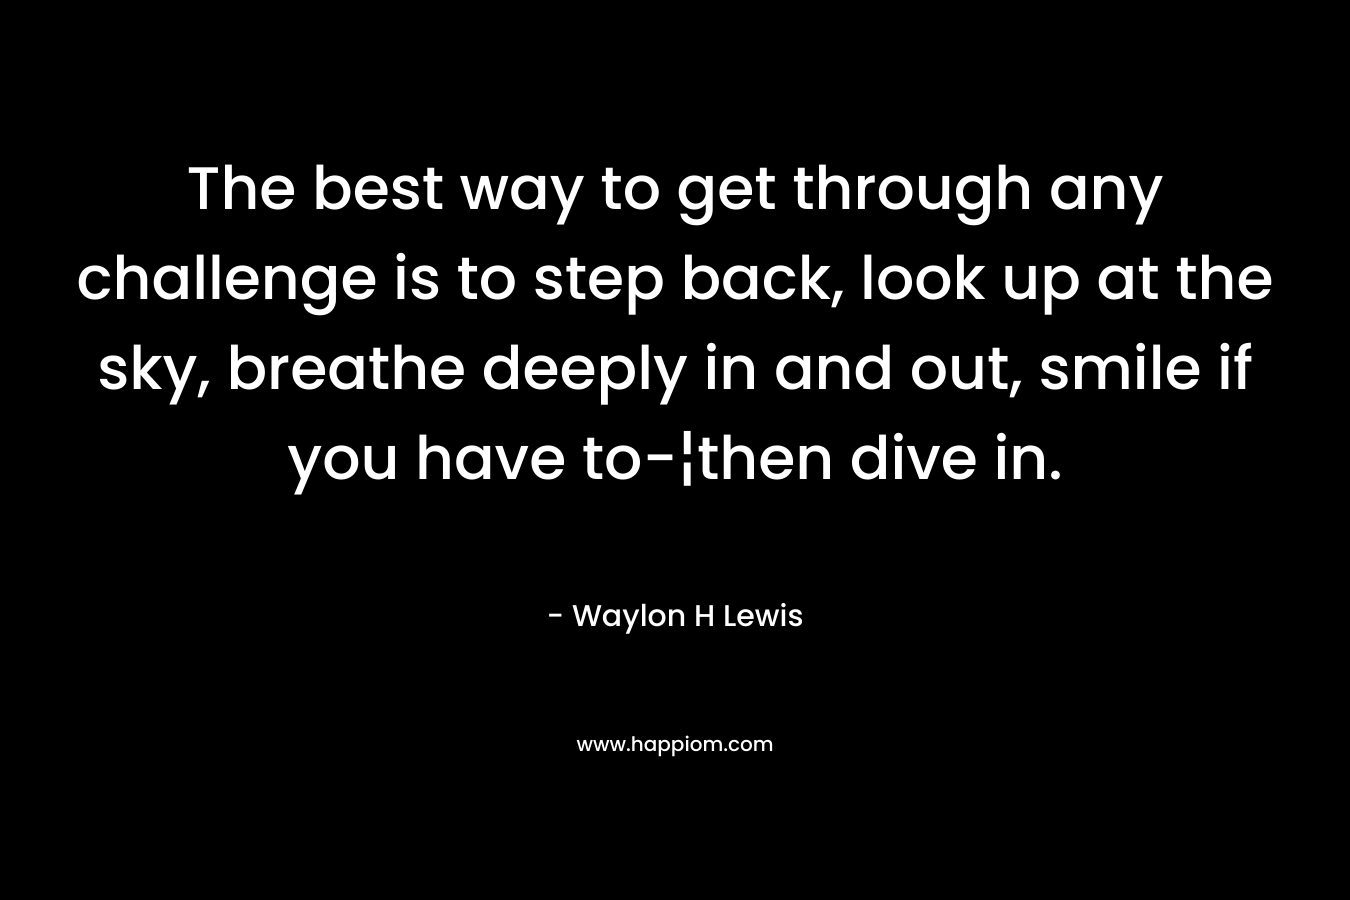 The best way to get through any challenge is to step back, look up at the sky, breathe deeply in and out, smile if you have to-¦then dive in. – Waylon H Lewis